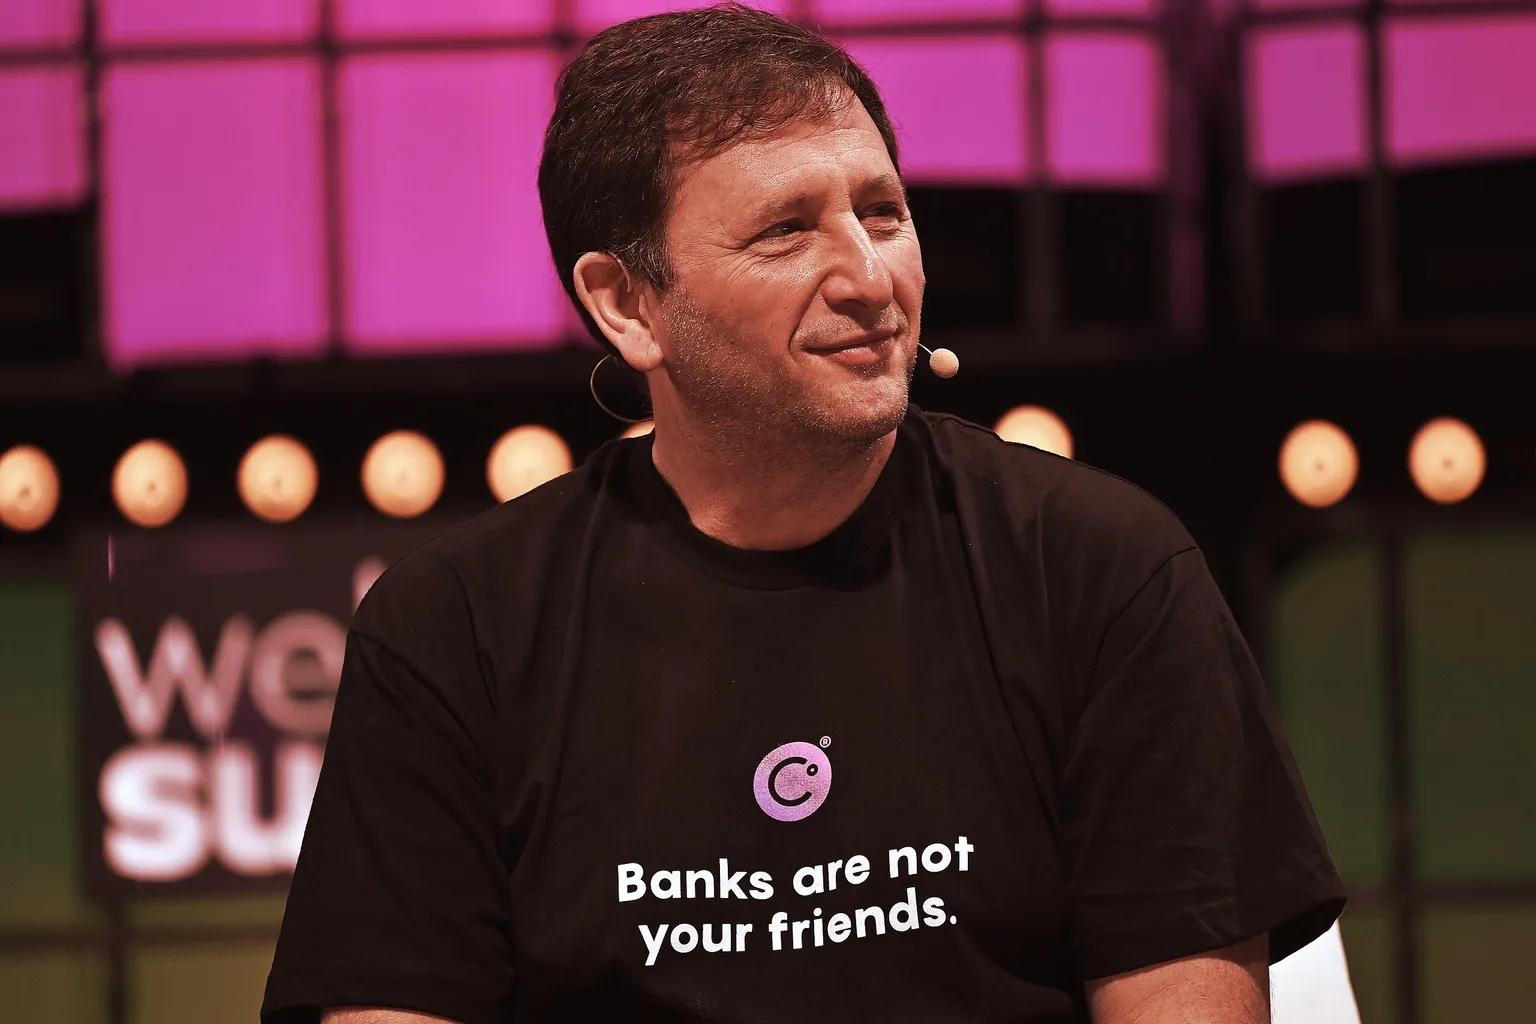 4 November 2021; Alex Mashinsky, Celcius, on Centre Stage during day three of Web Summit 2021 at the Altice Arena in Lisbon, Portugal. Photo by Piaras Ó Mídheach/Web Summit via Sportsfile